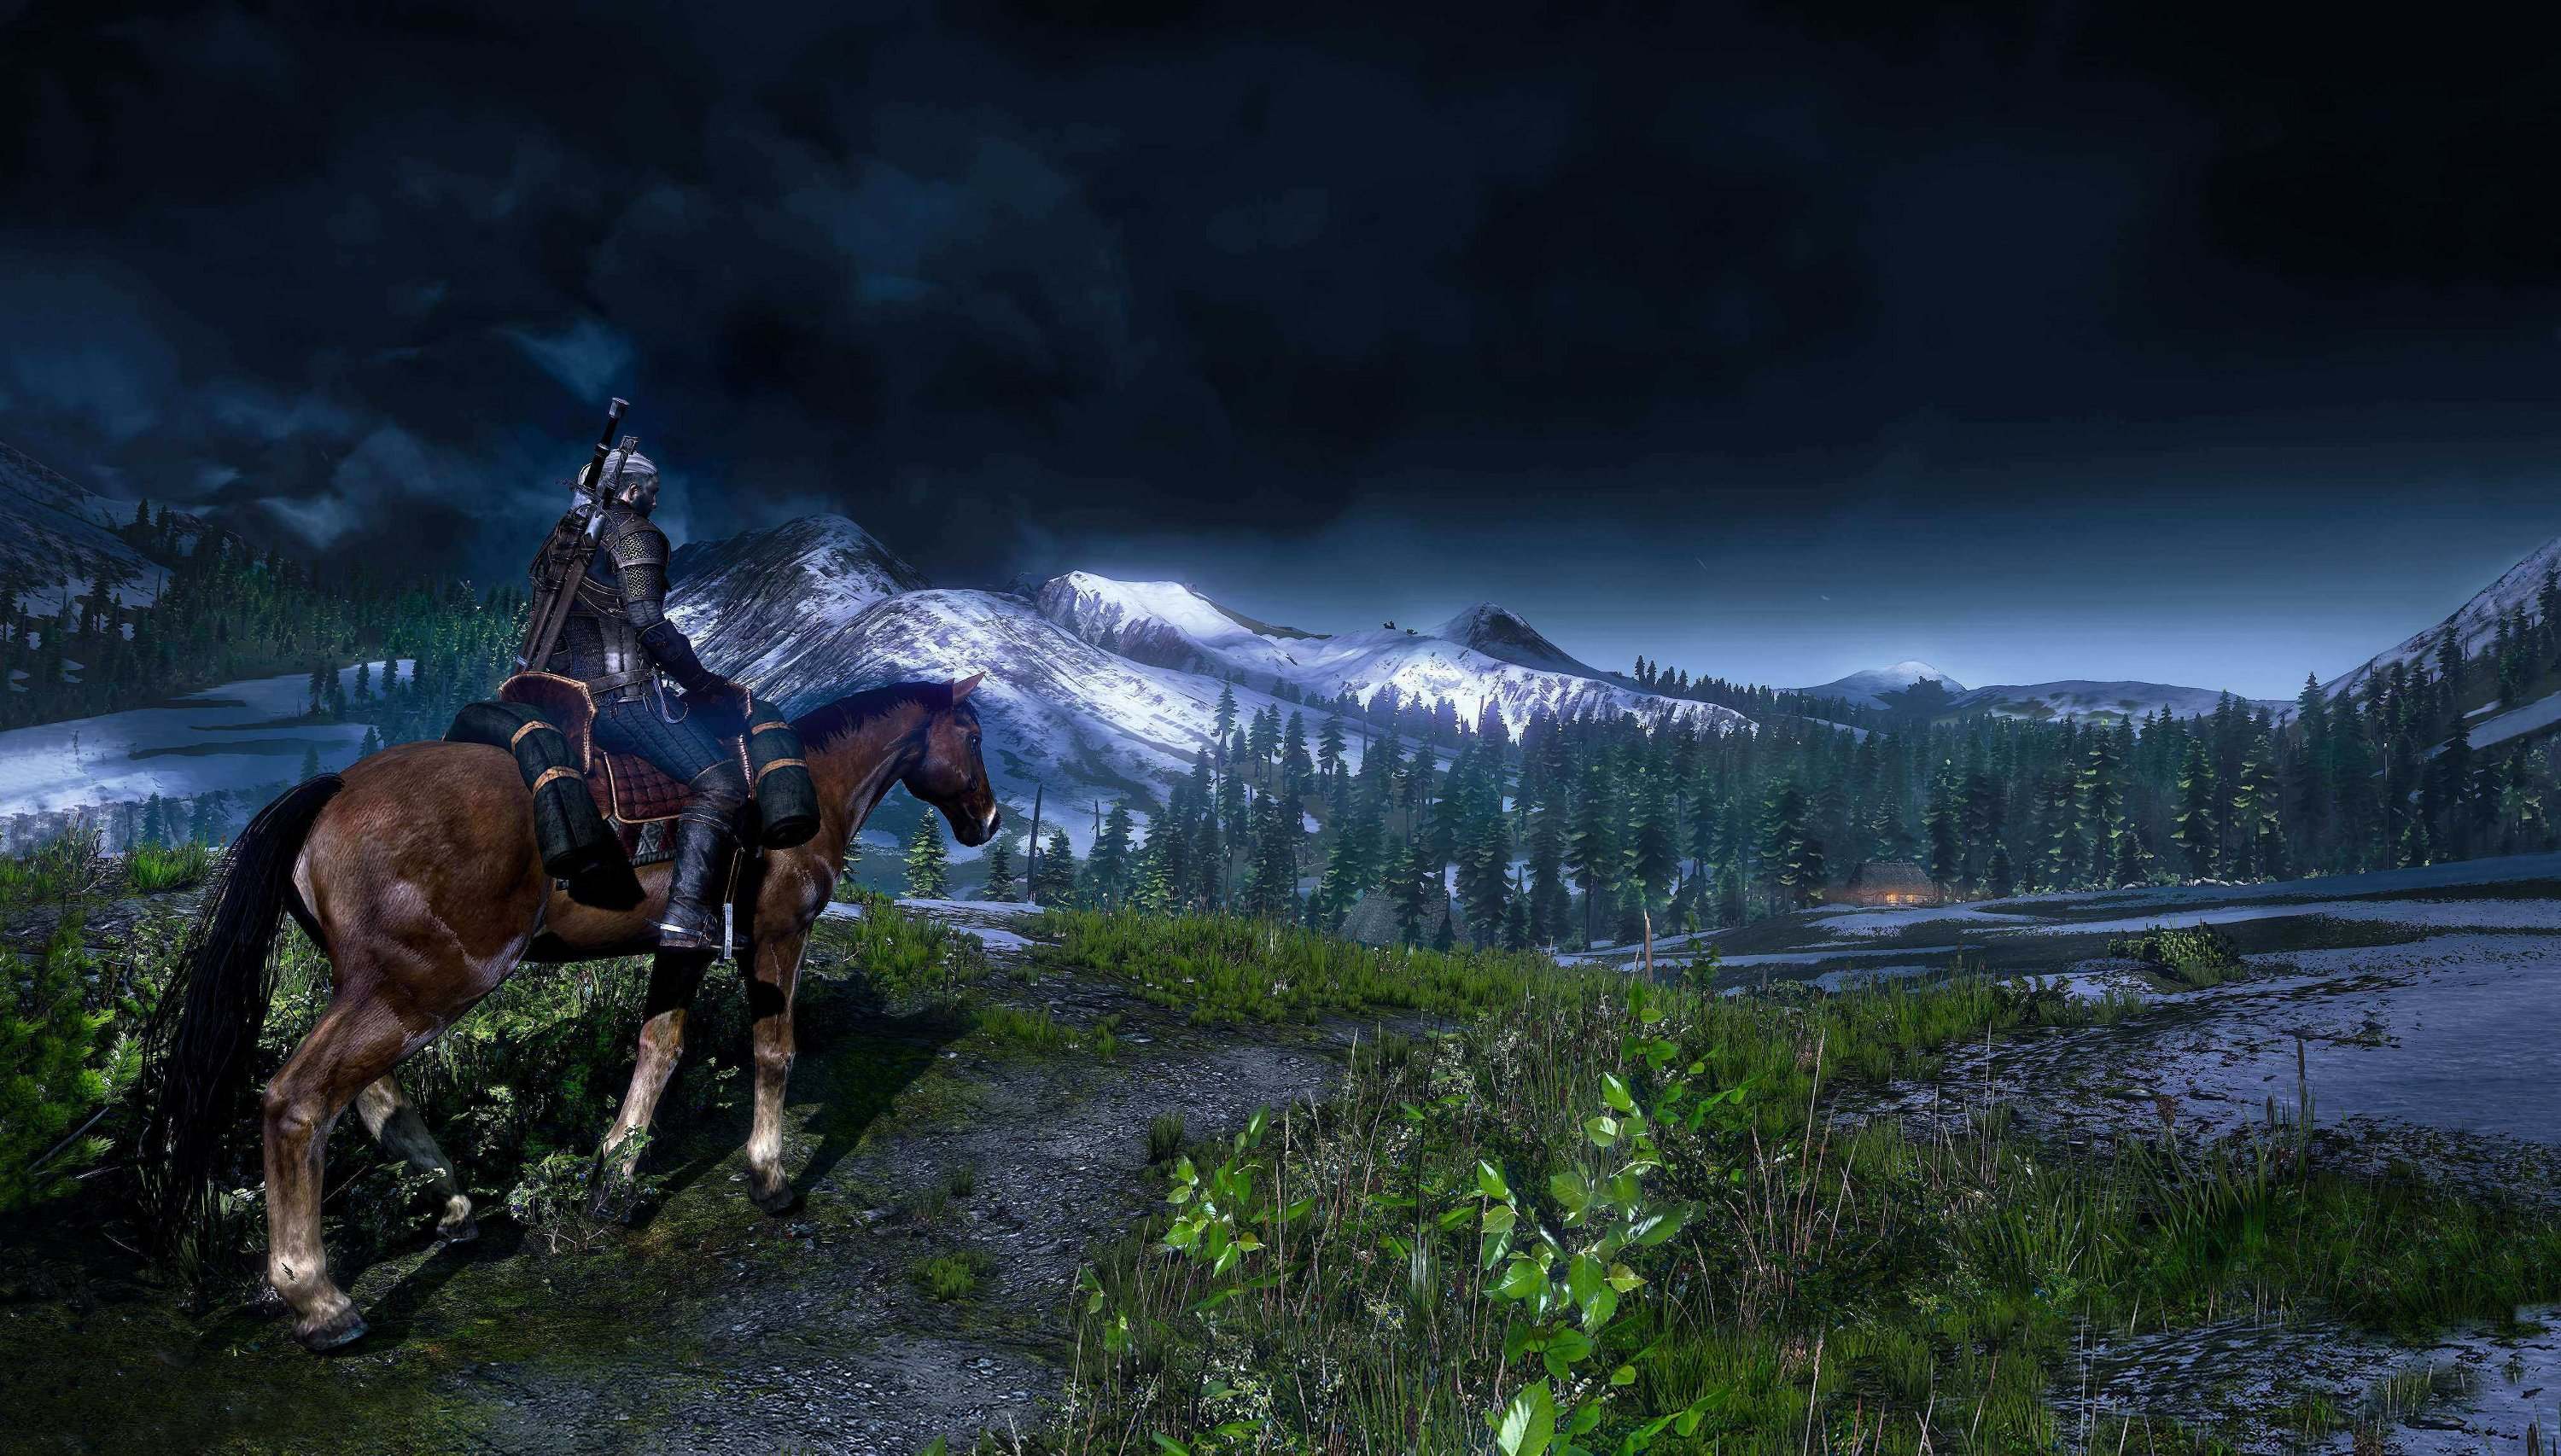 Media asset in full size related to 3dfxzone.it news item entitled as follows: Guarda gli screenshots del game RPG The Witcher 3: Wild Hunt | Image Name: news19346_the-witcher-3-wild-hunt-screenshot_2.jpg